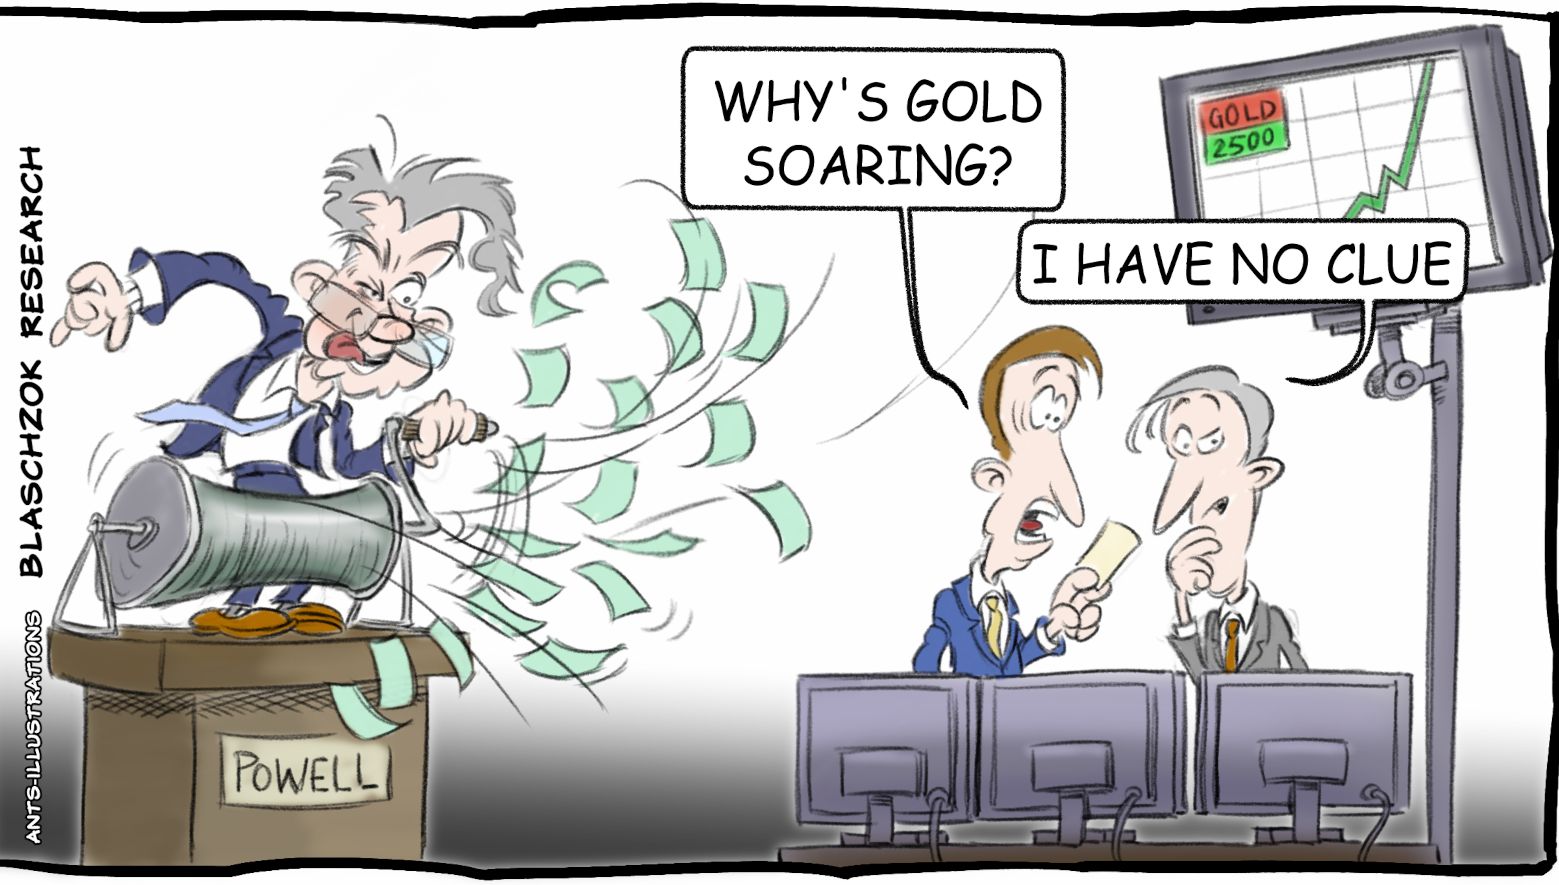 The mysterious gold rally